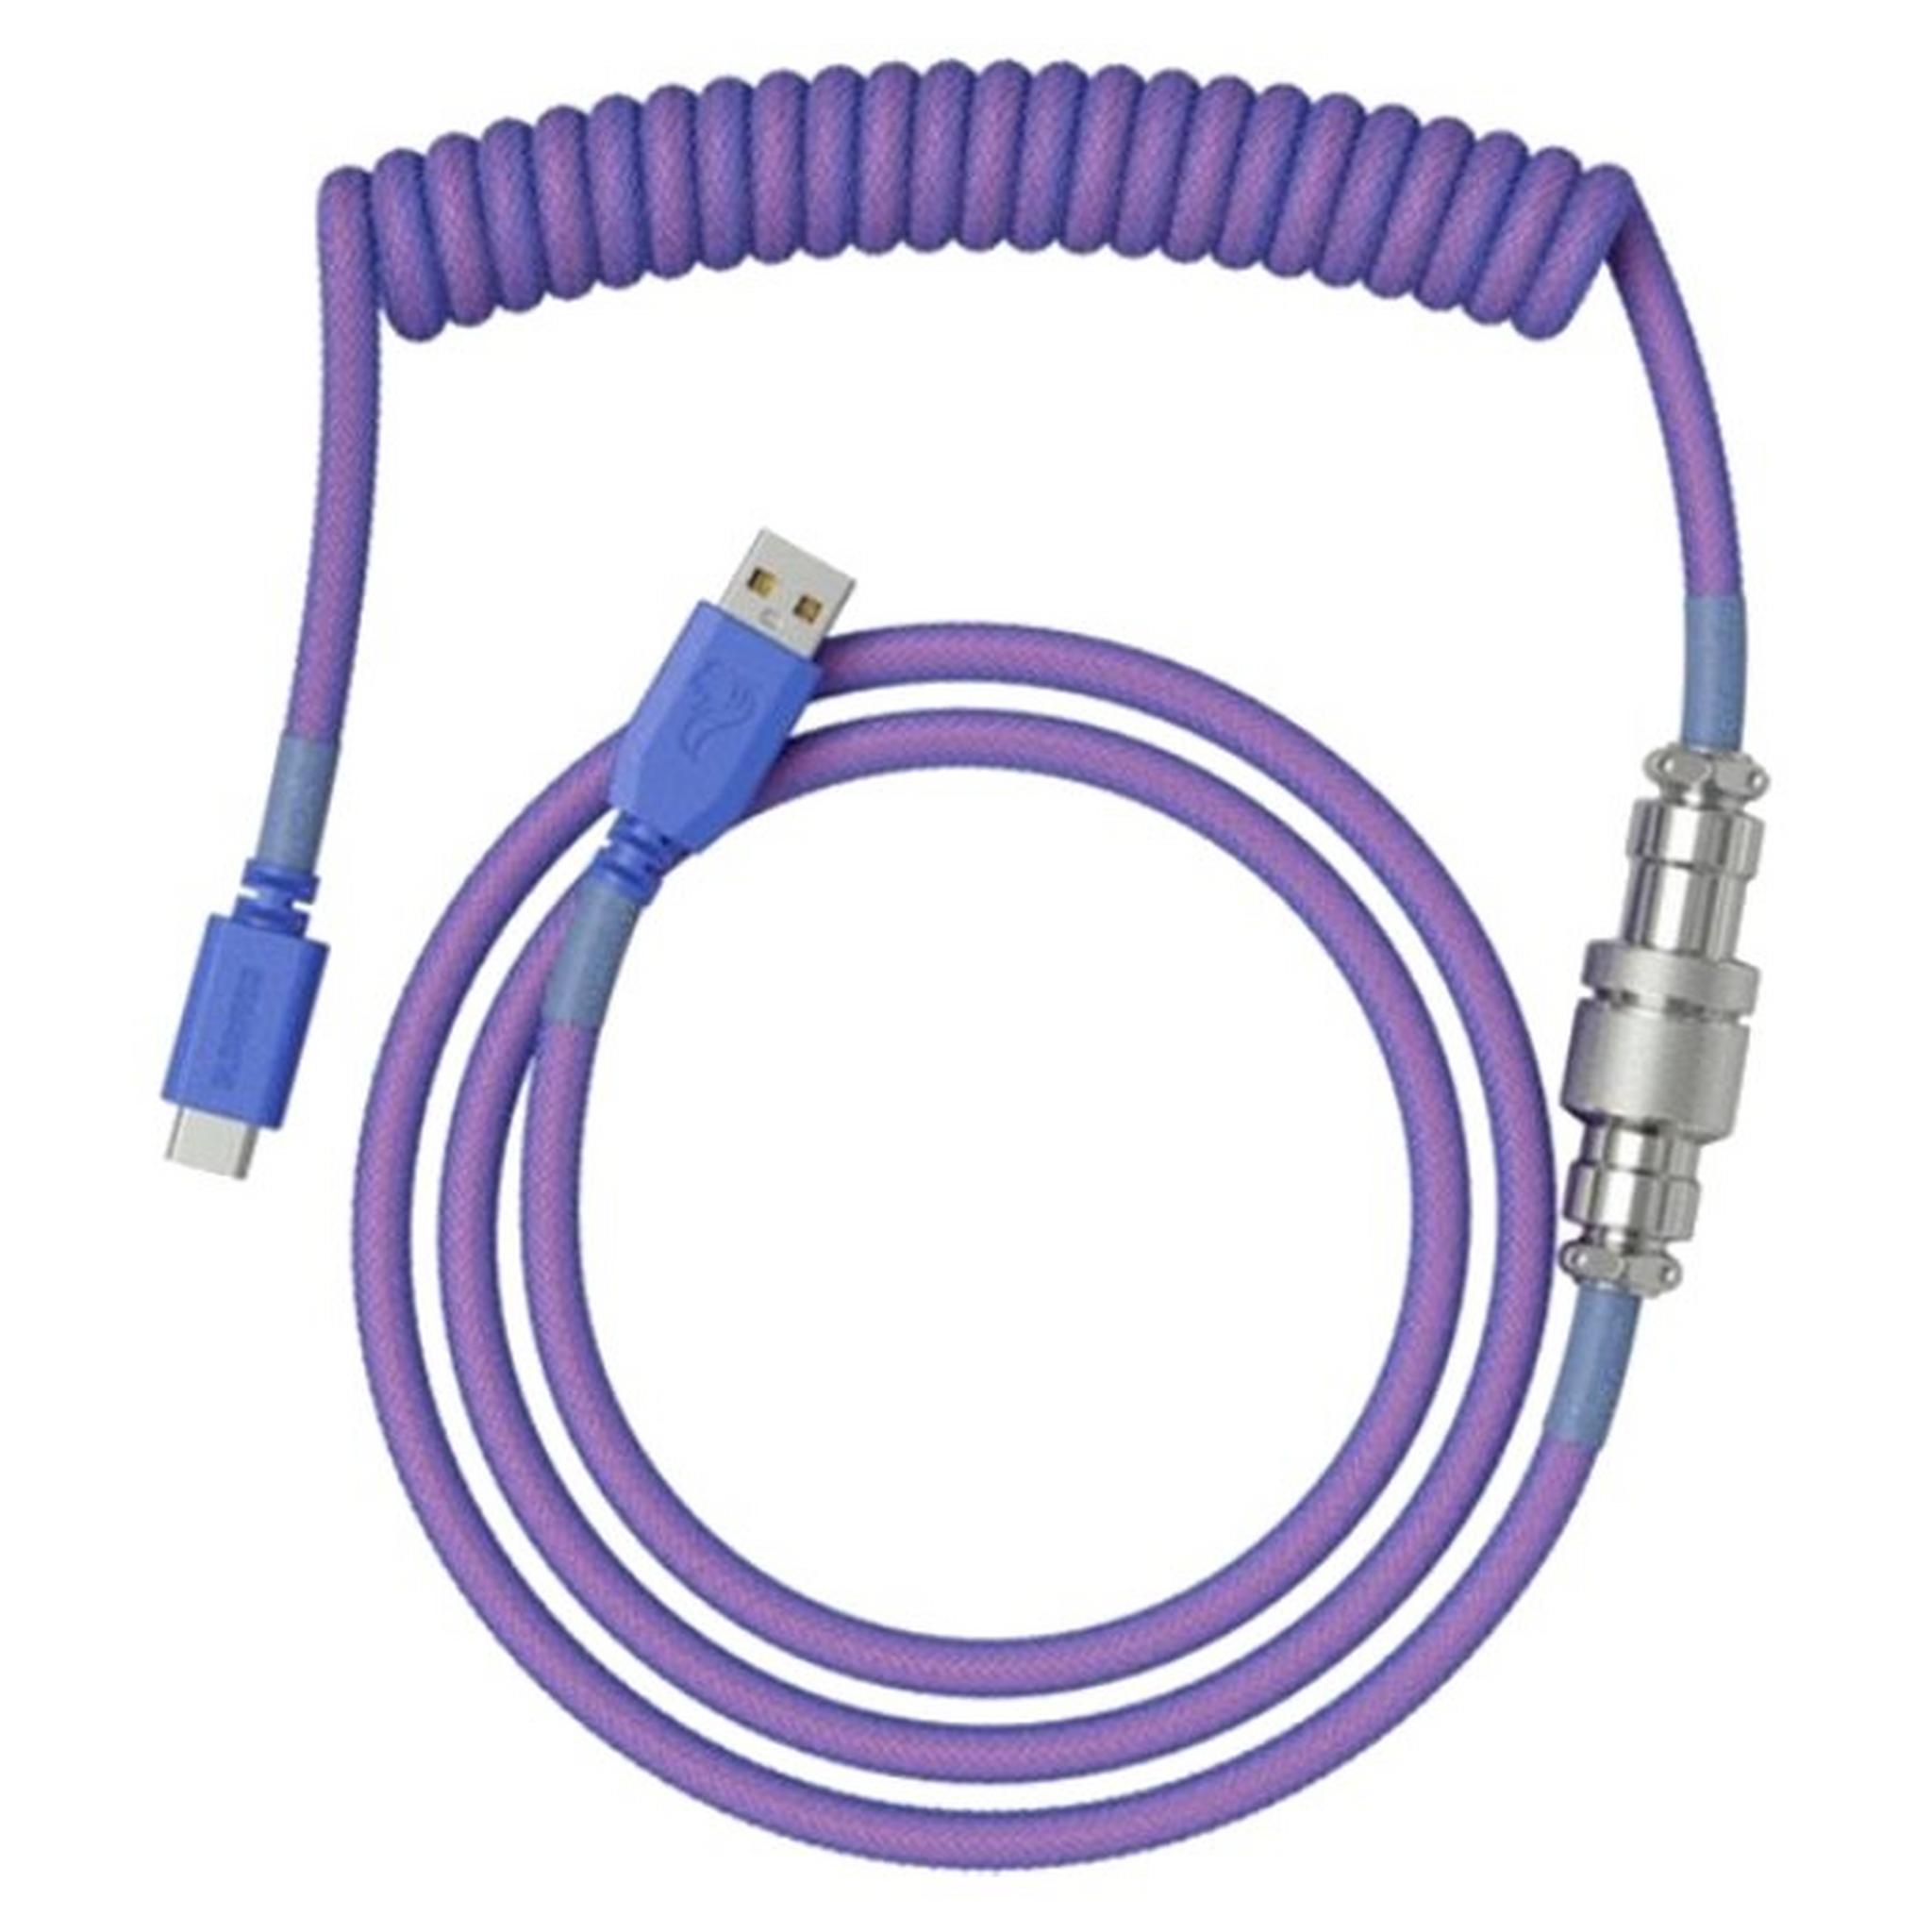 Glorious Coiled 4.5ft Cable for Keyboard - Nebula